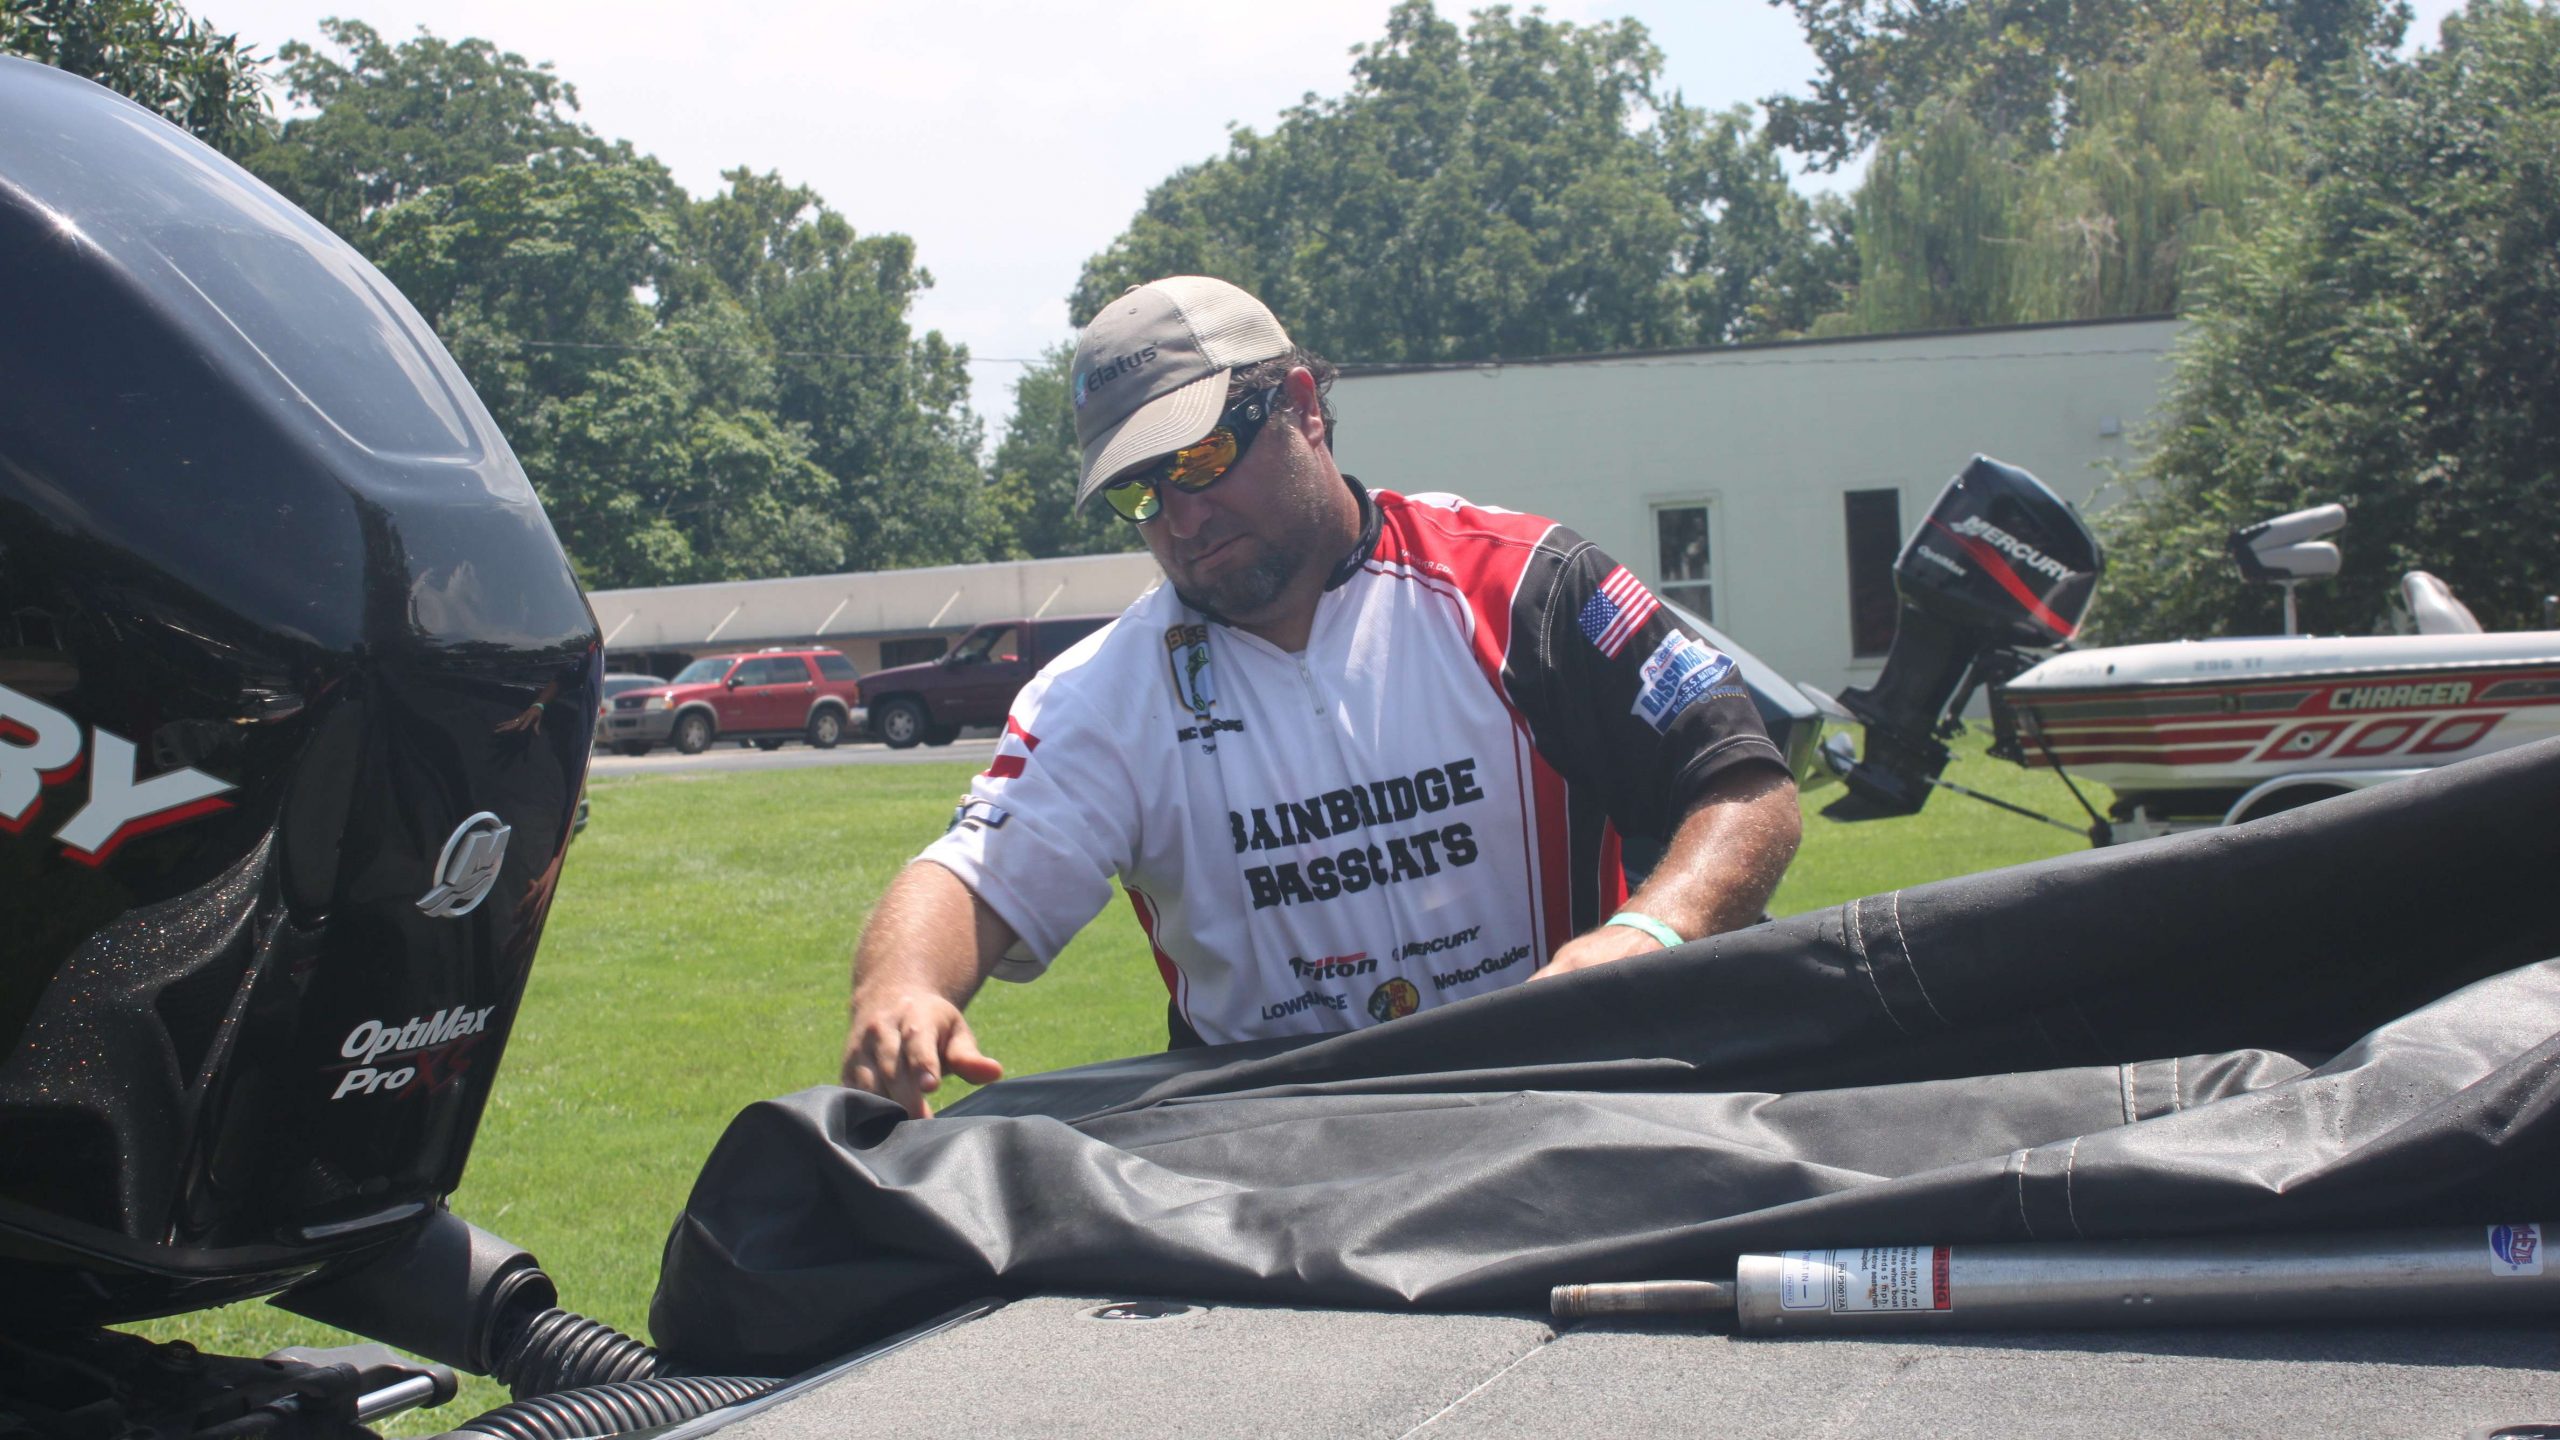 Lance Birdsong said his wife would love to see a picture of him working on his boat on Bassmaster.com. Here you go, as heâs putting the cover on the rig. Good job, Lance!

